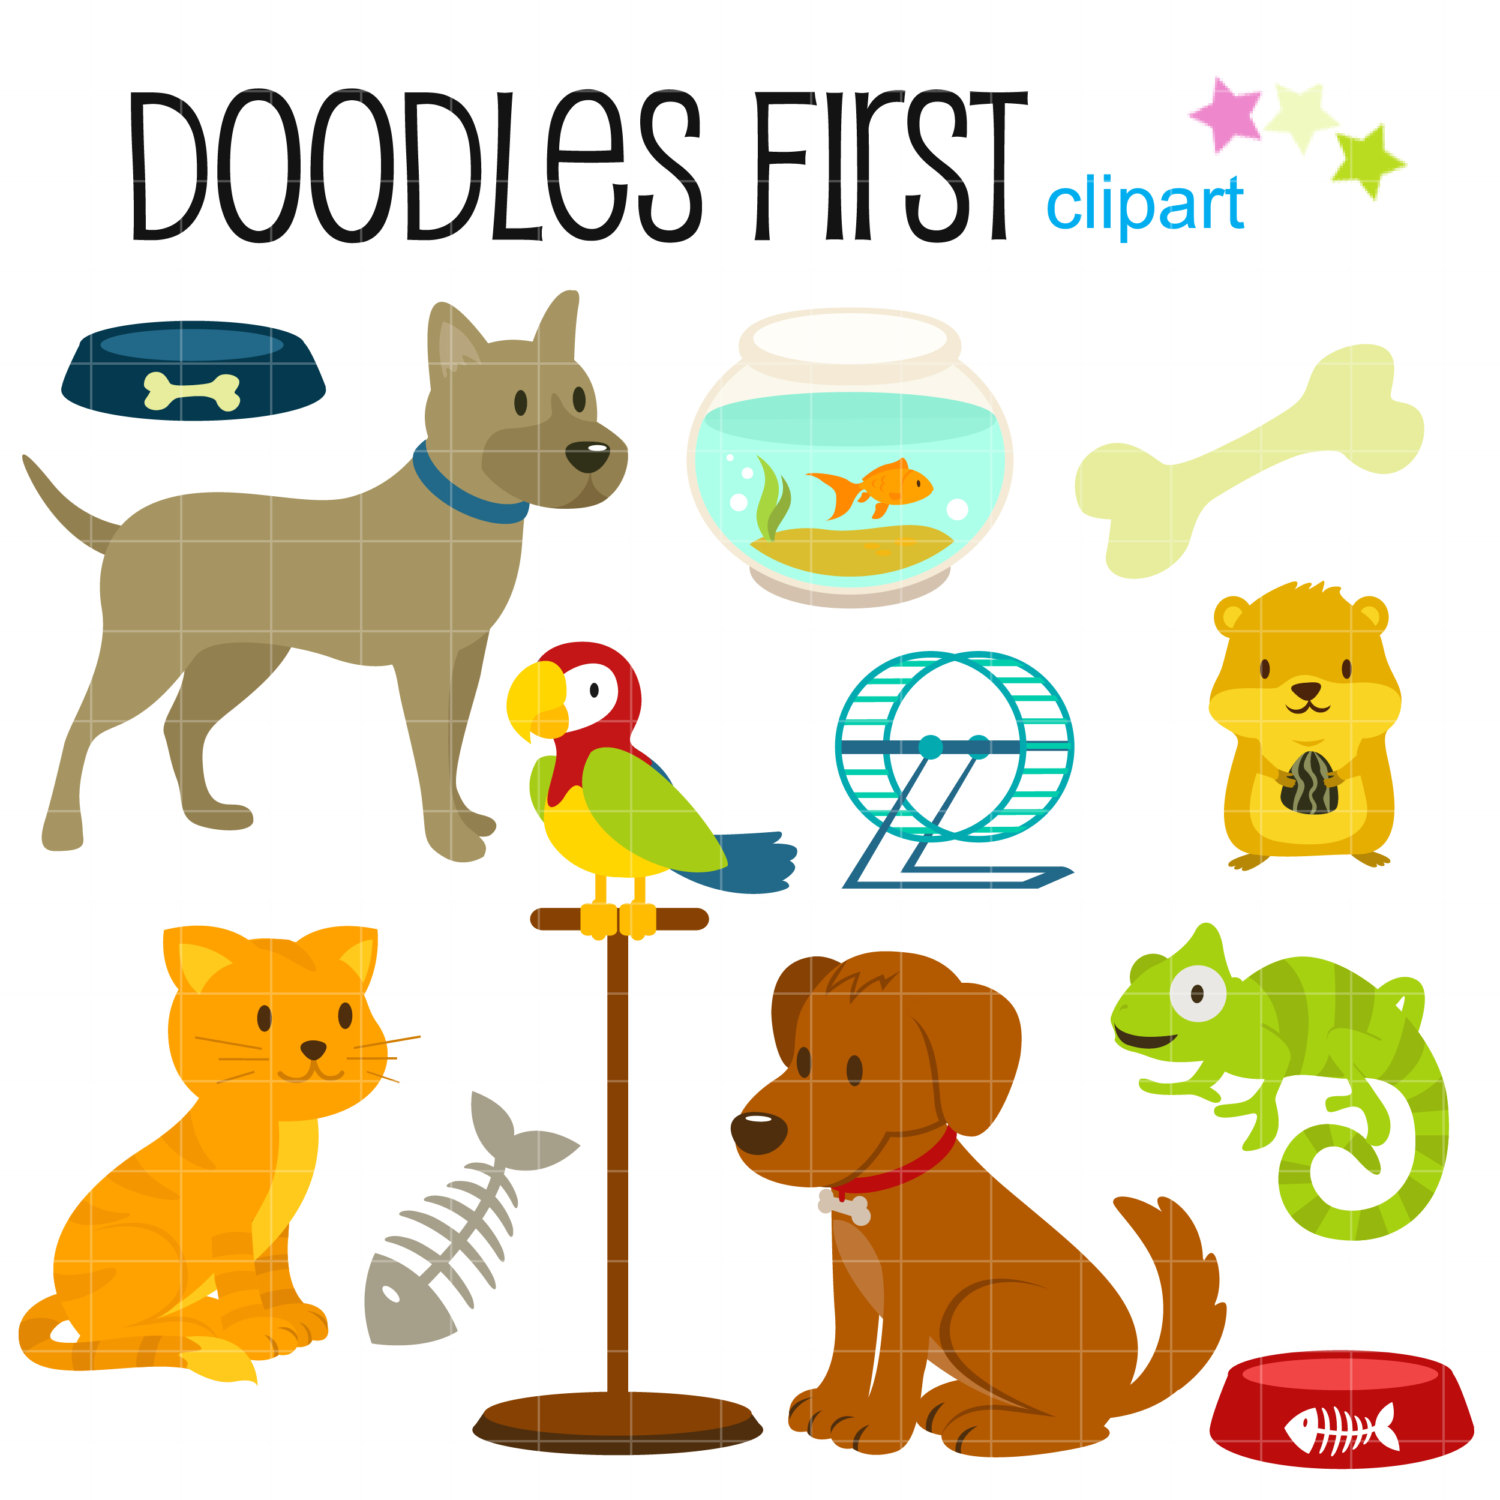 Petshop Animals And Accesories Digital Clip Art By Doodlesfirst